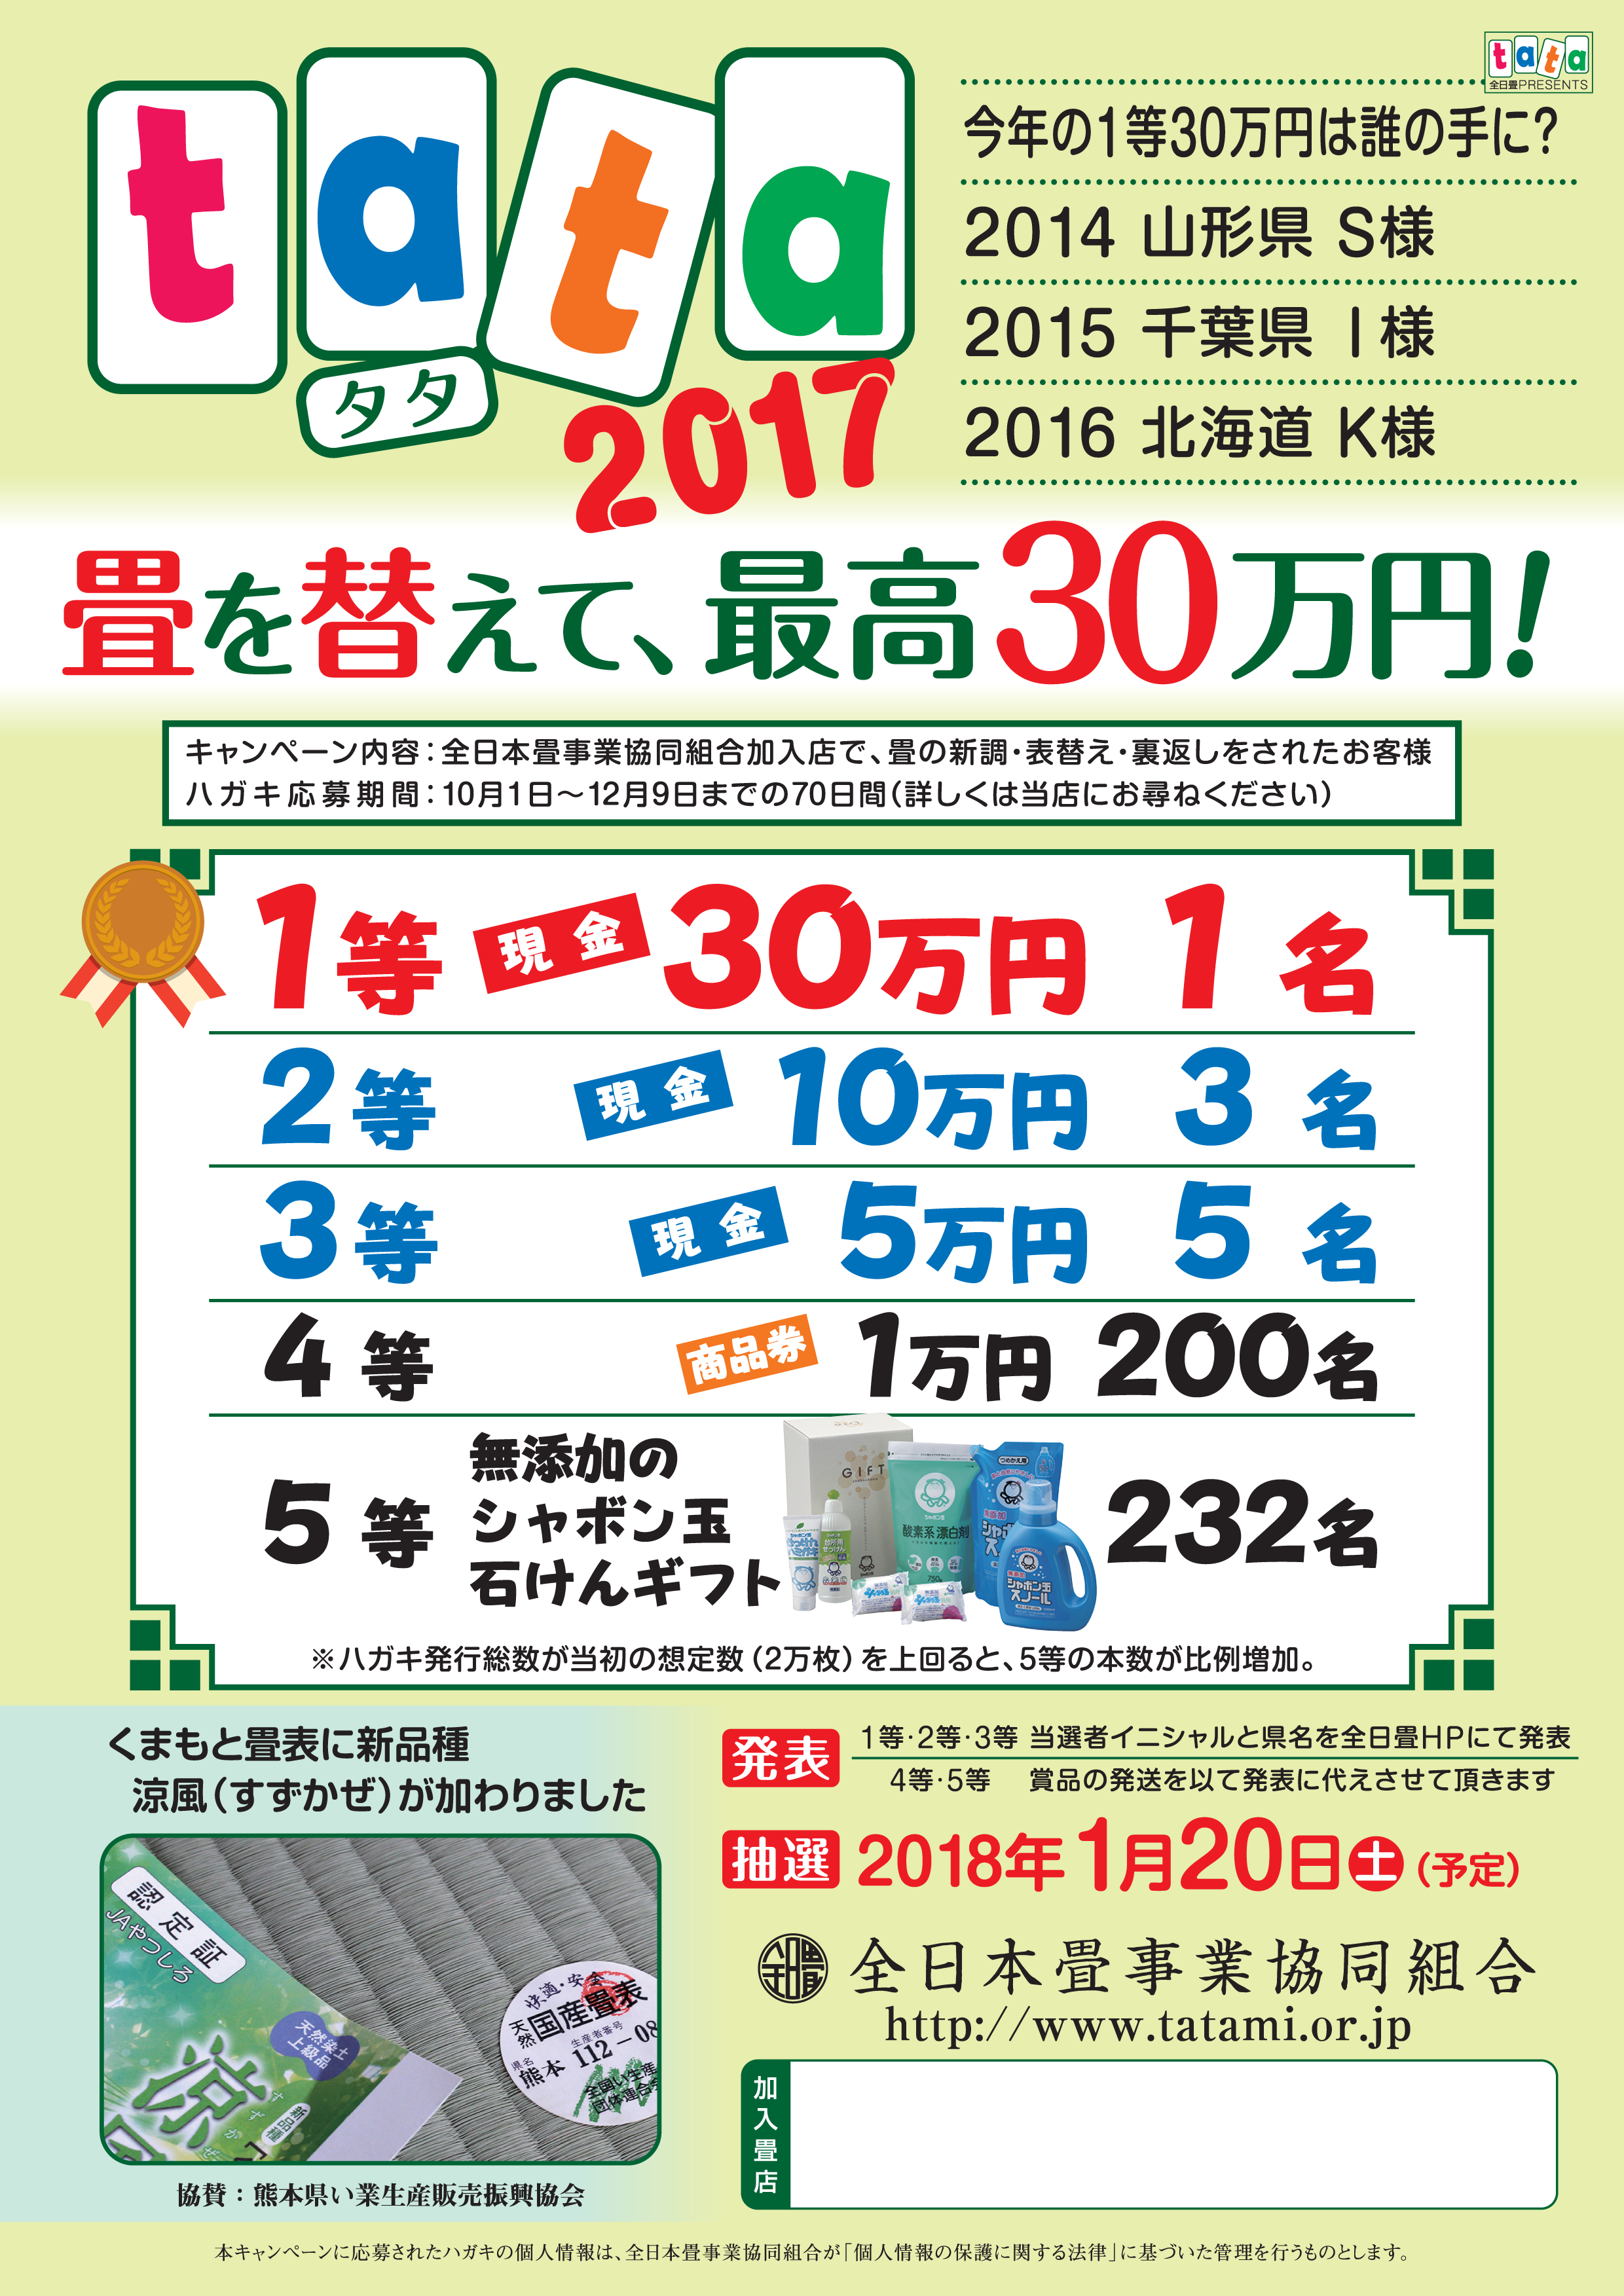 http://www.if-101.com/news/upload_images/tata2017a4.png